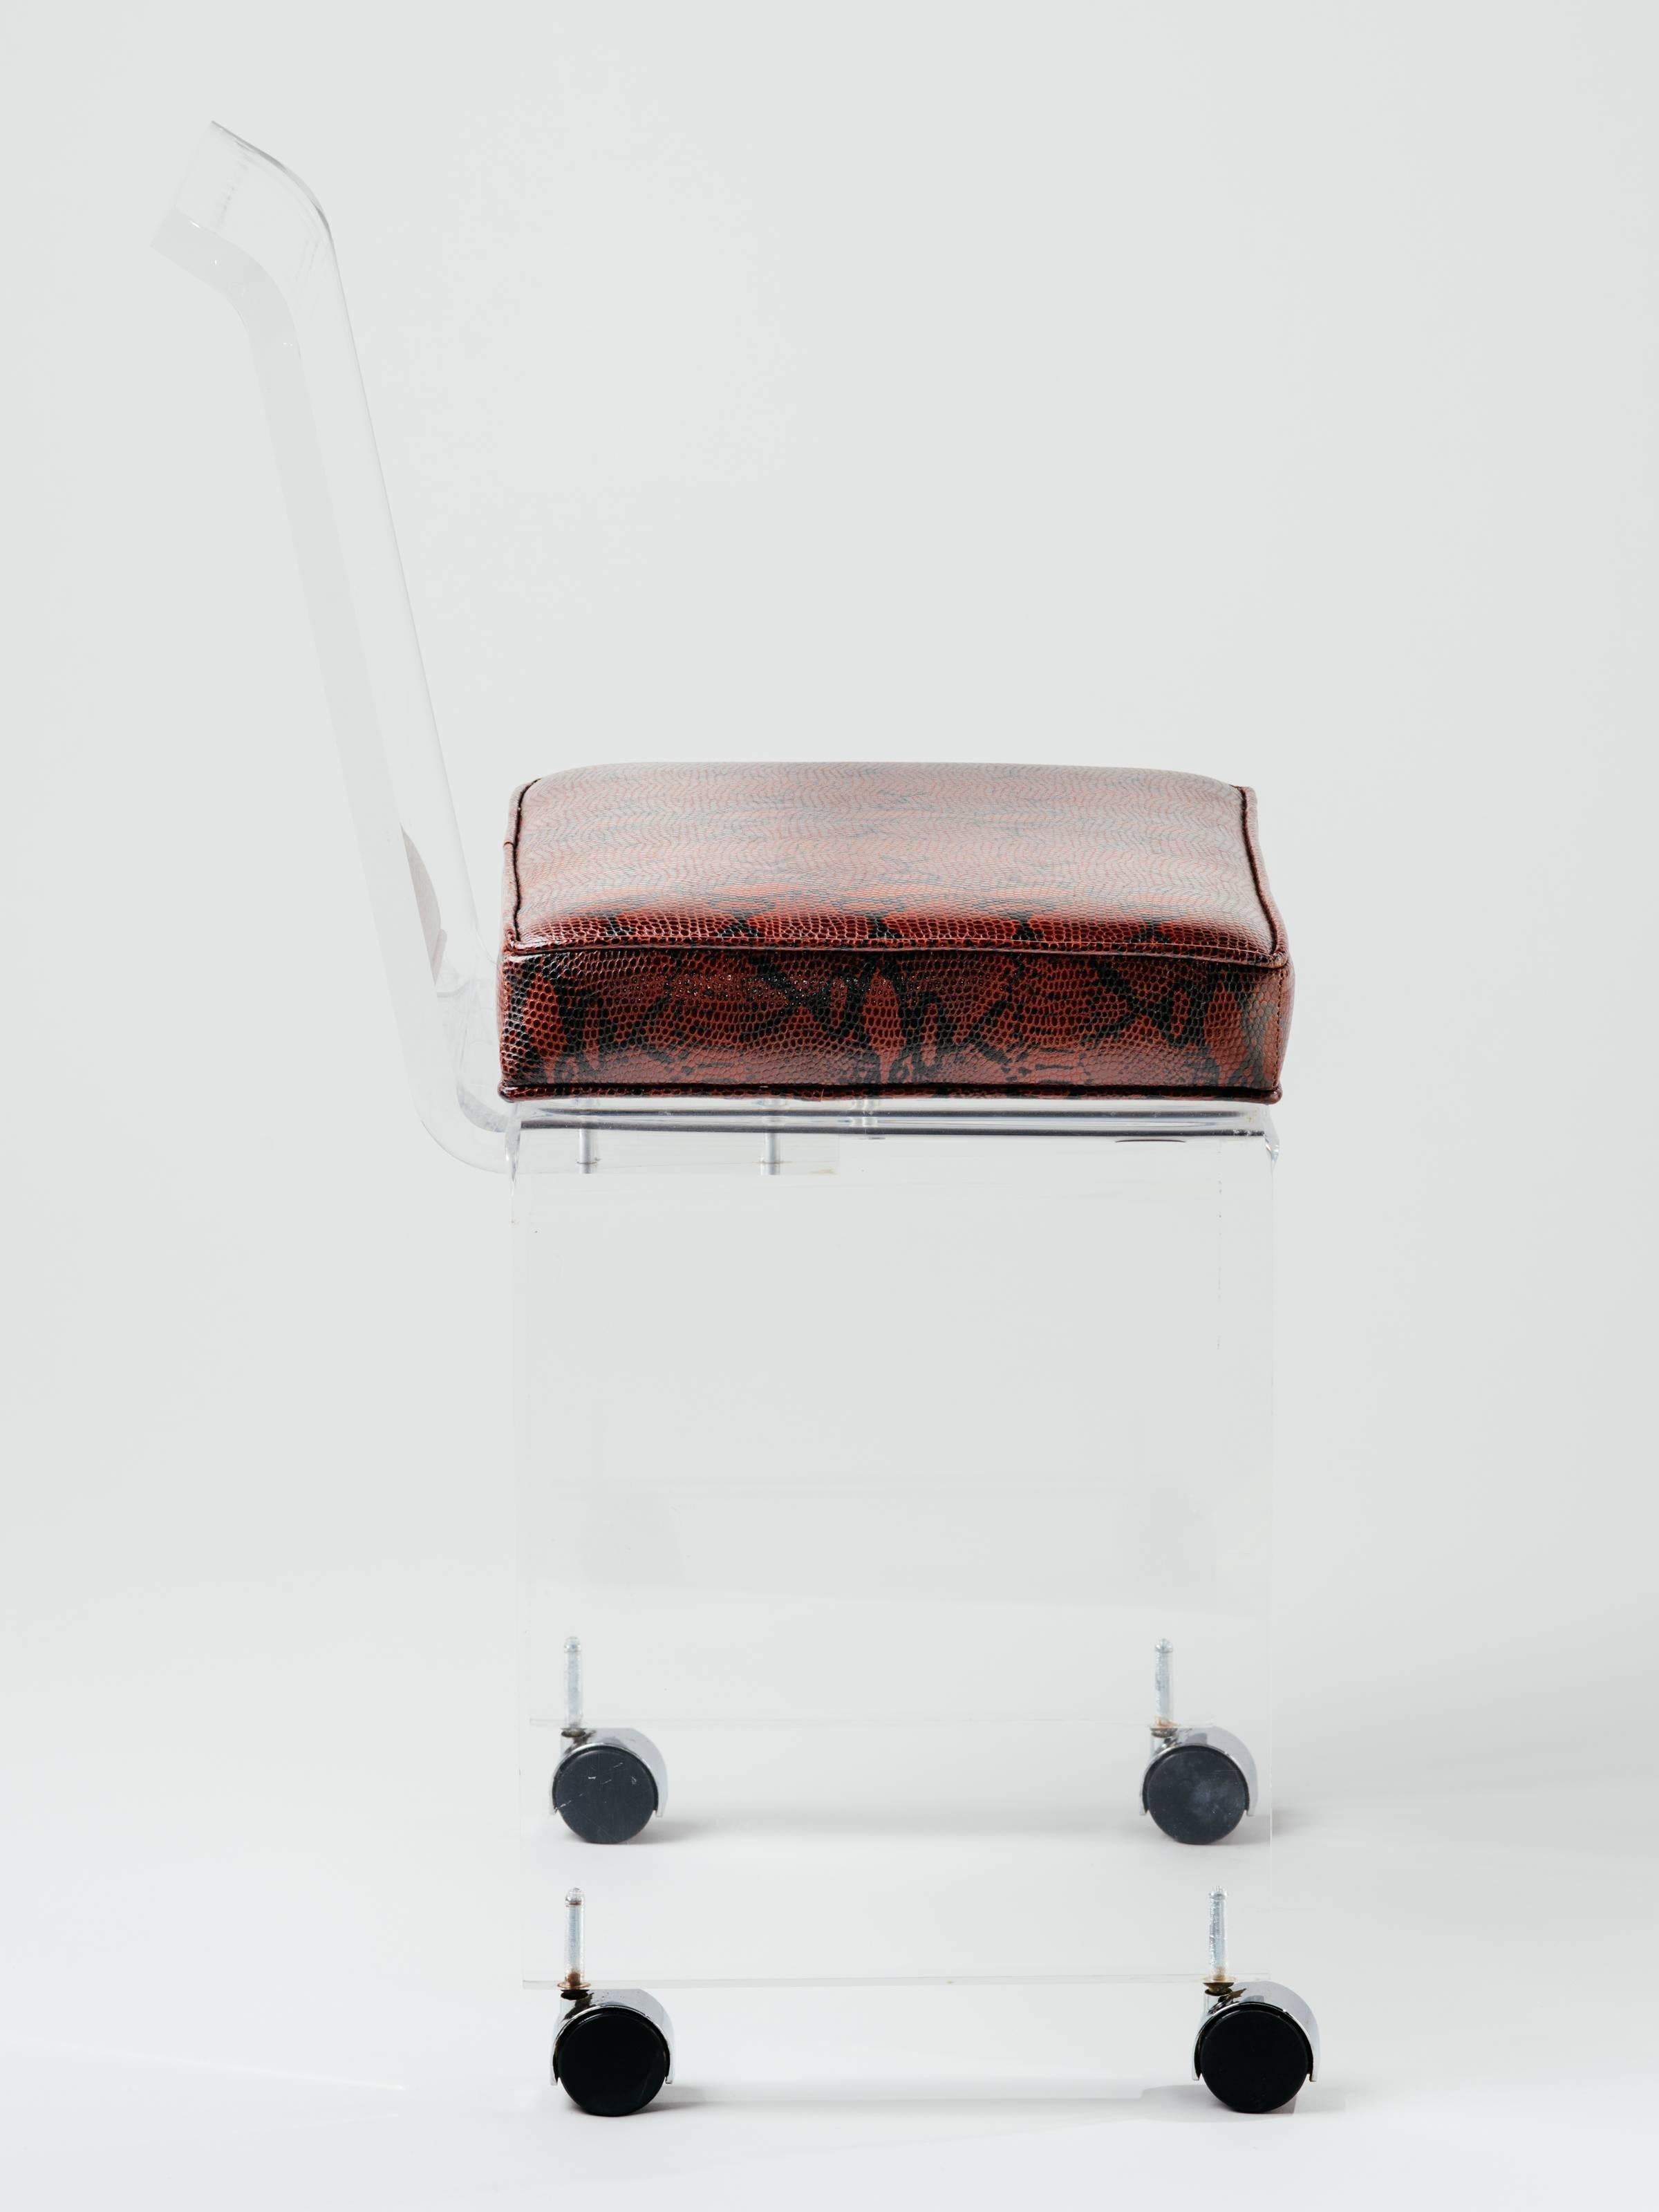 Mid-Century Modern Lucite vanity chair in genuine leather with embossed snakeskin print in deep red. It is real leather, faux python print. Stool has sleek lines with full back design, and polished bevelled edges. Features swivel casters for